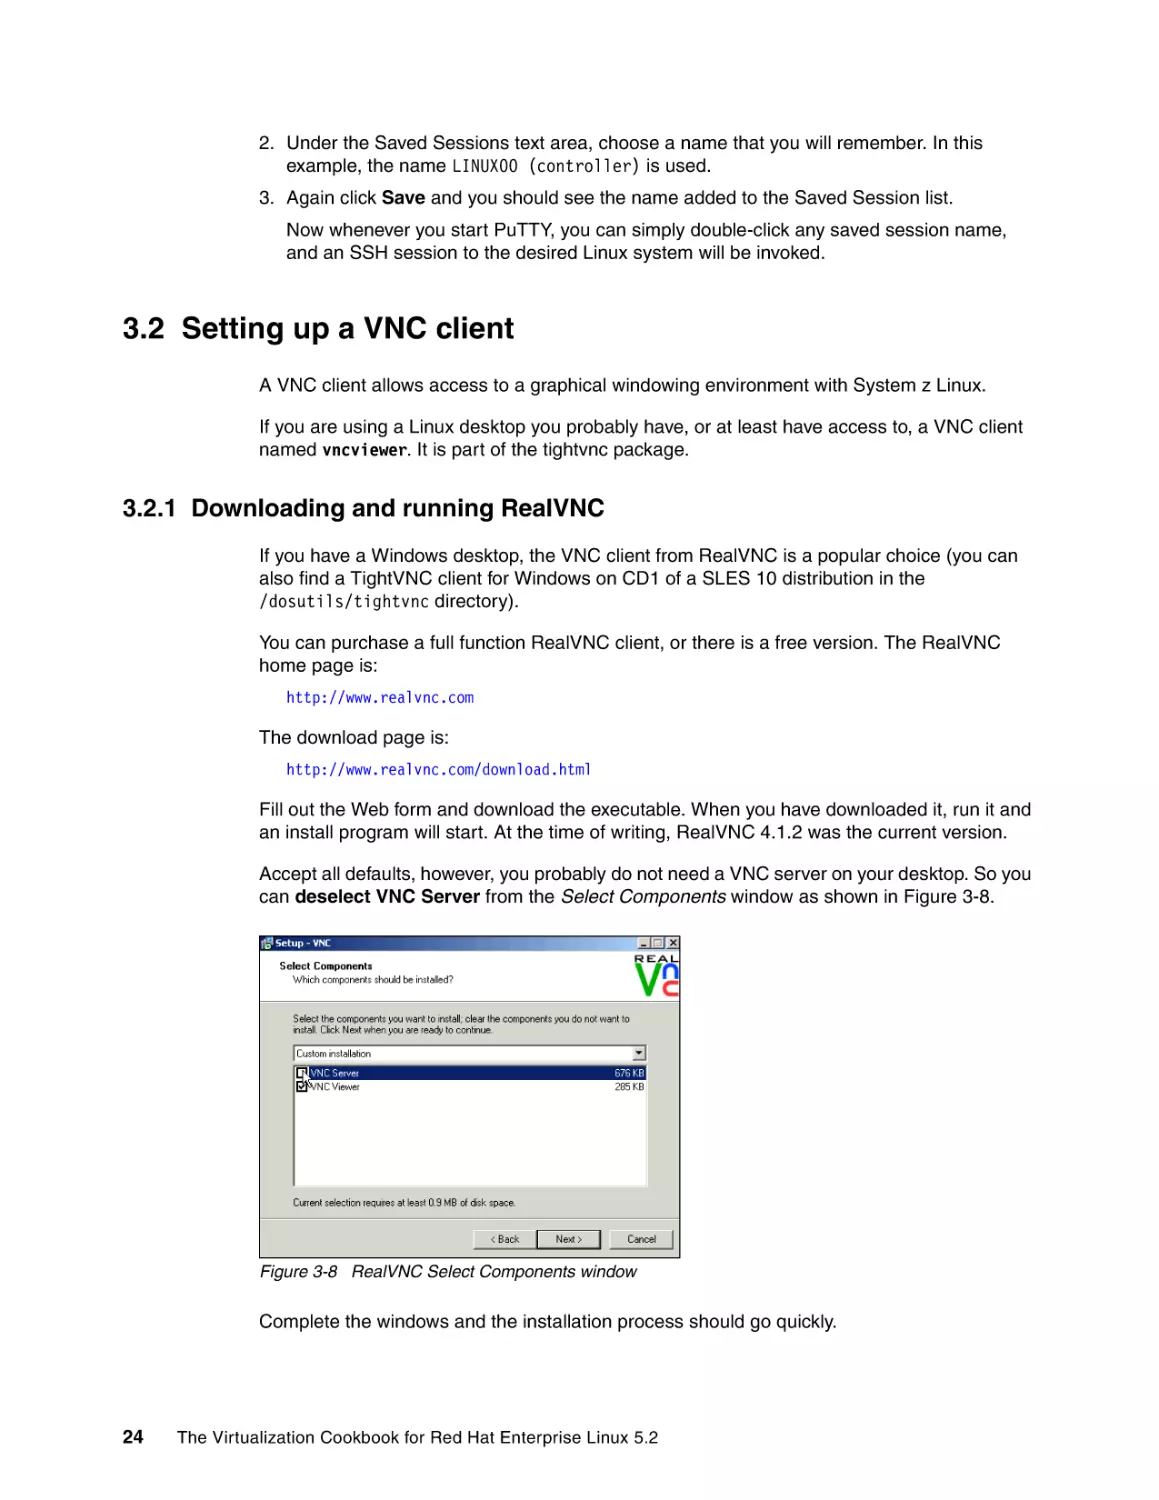 3.2 Setting up a VNC client
3.2.1 Downloading and running RealVNC